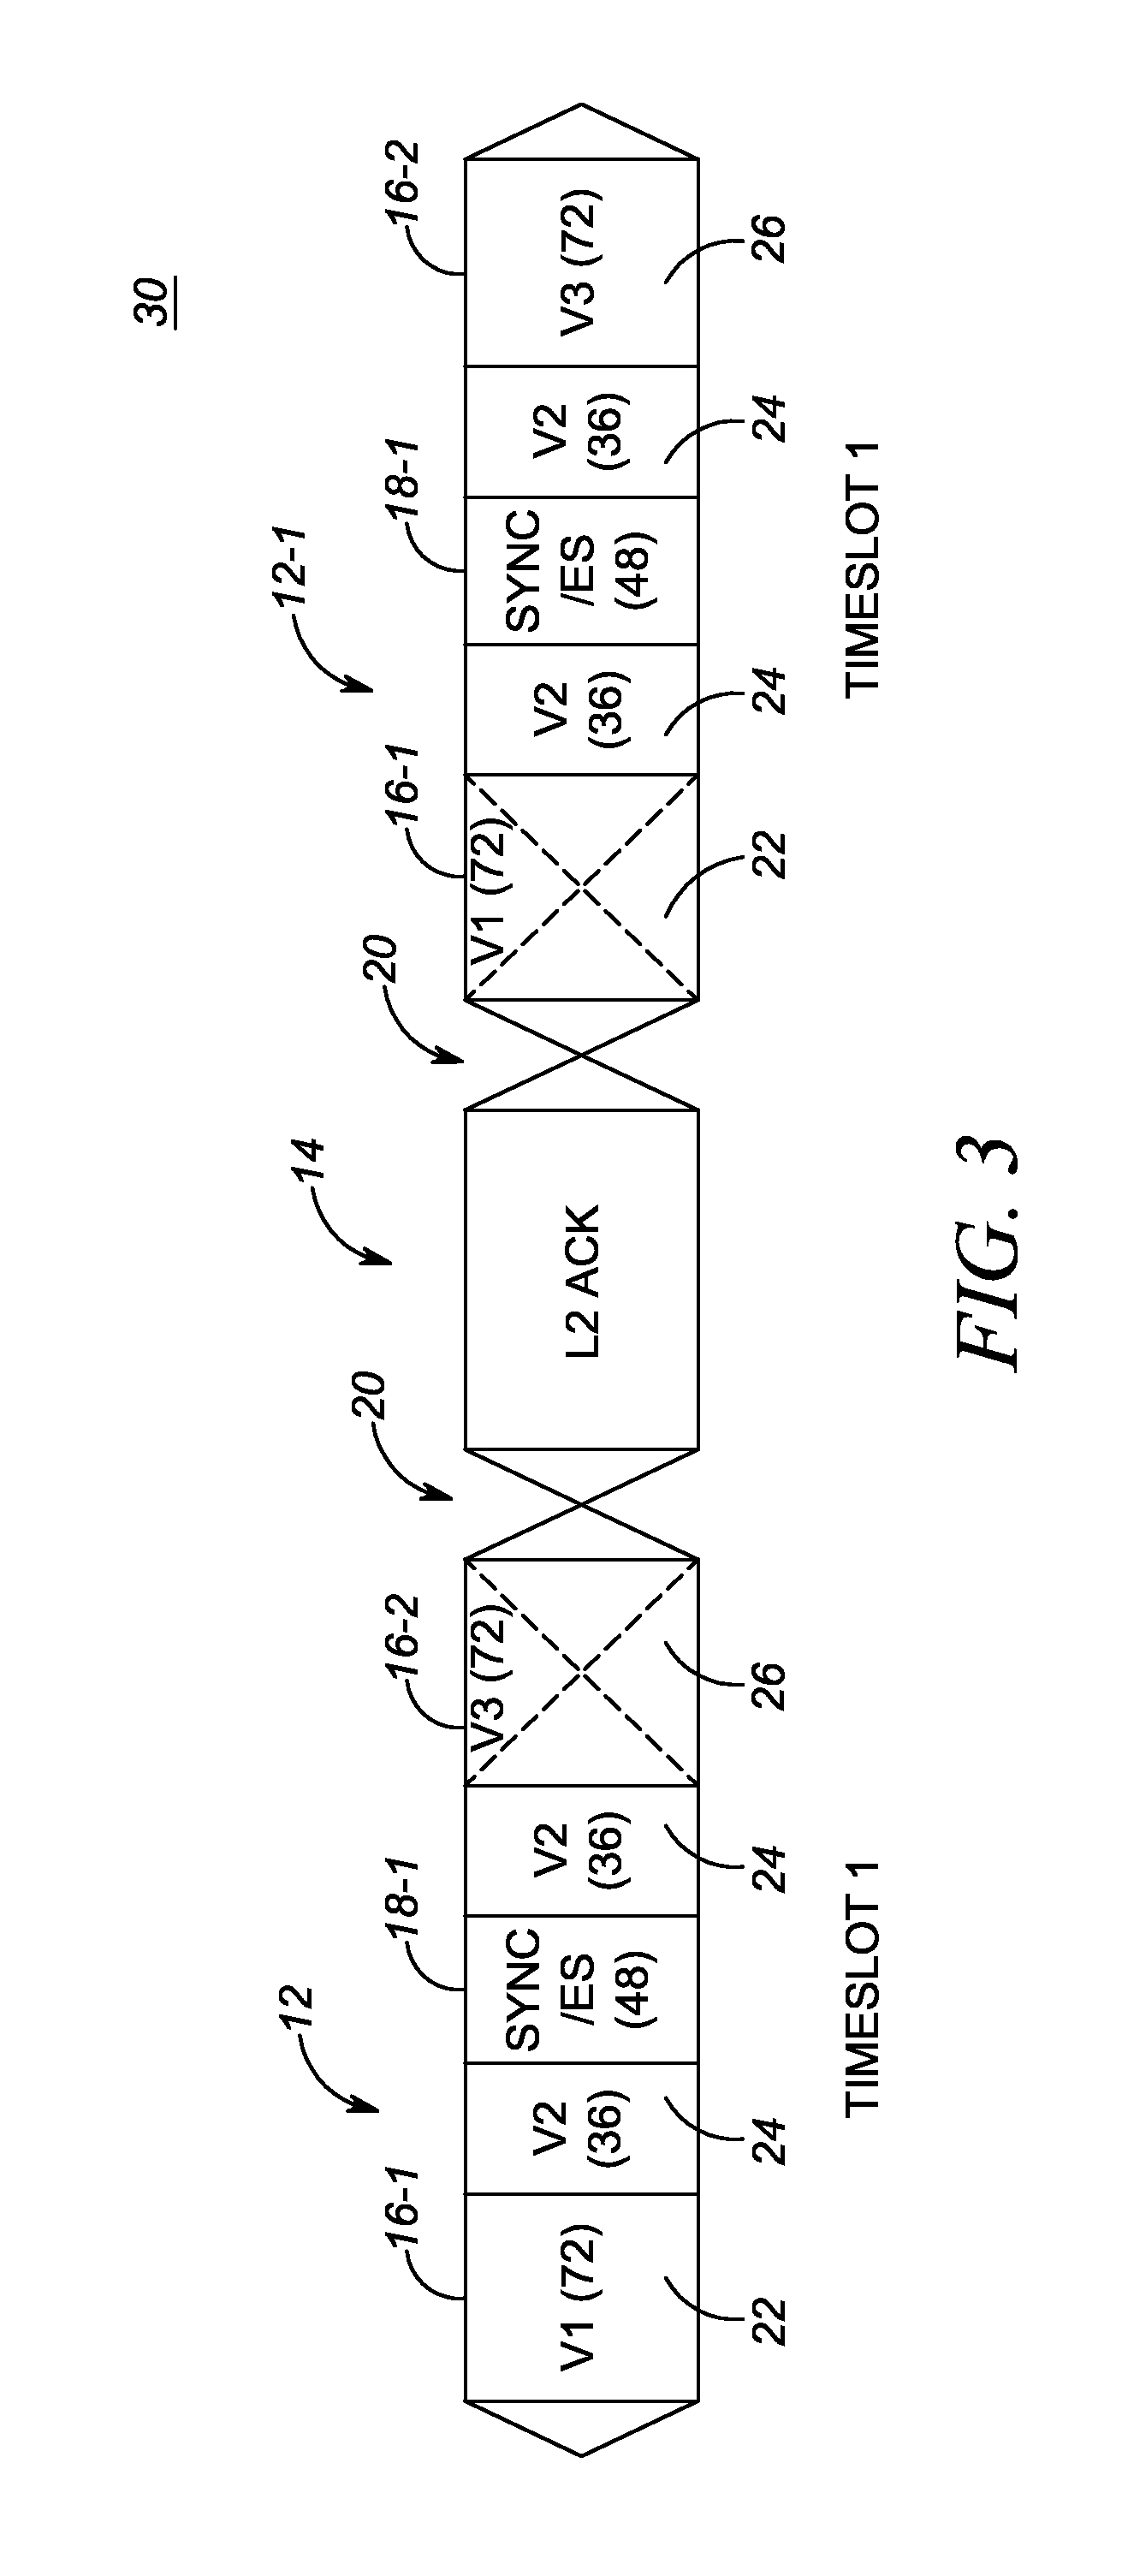 Method and apparatus for wirelessly transacting simultaneous voice and data on adjacent timeslots